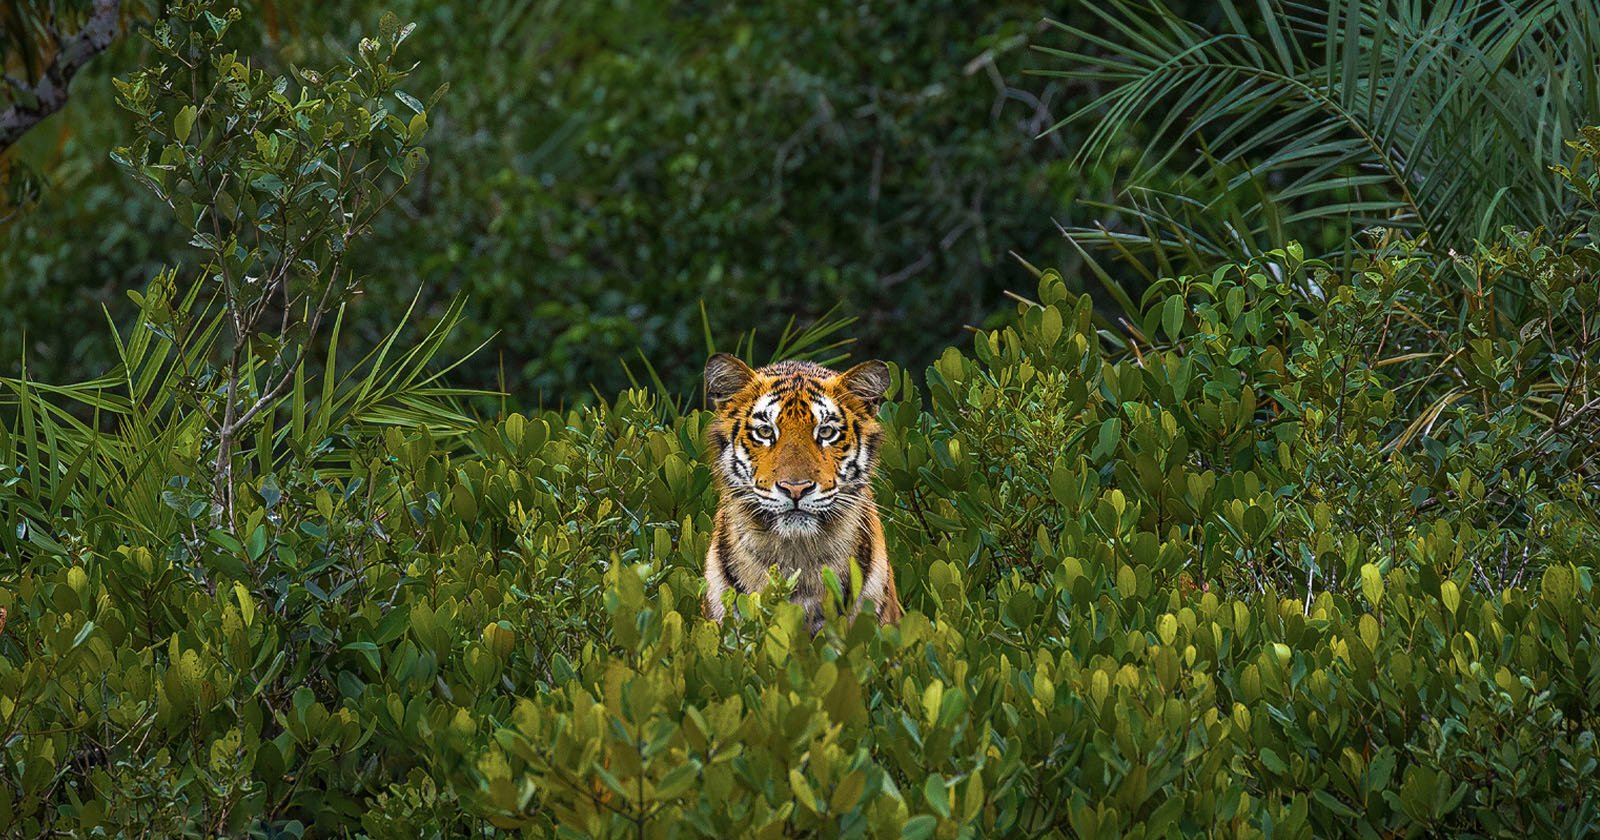  dead-eyed tiger staring out from mangrove wins photo 